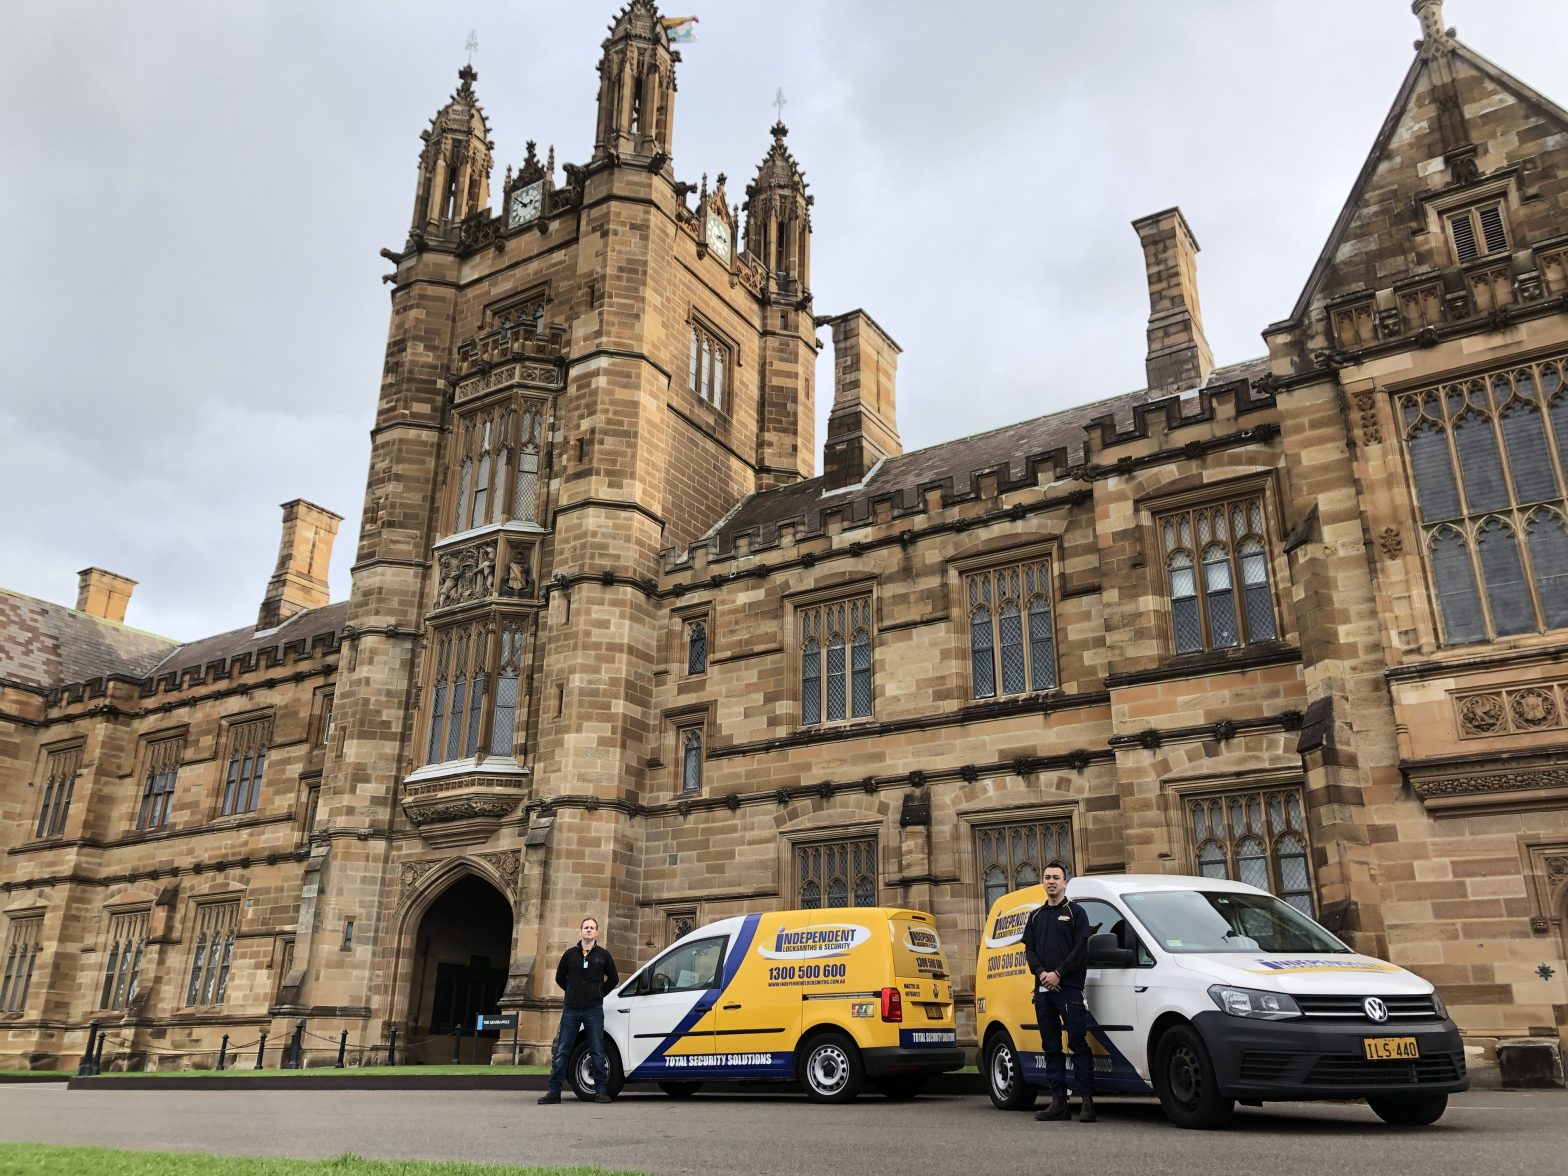 Independent Locksmiths & Security are contracted at The University of Sydney.